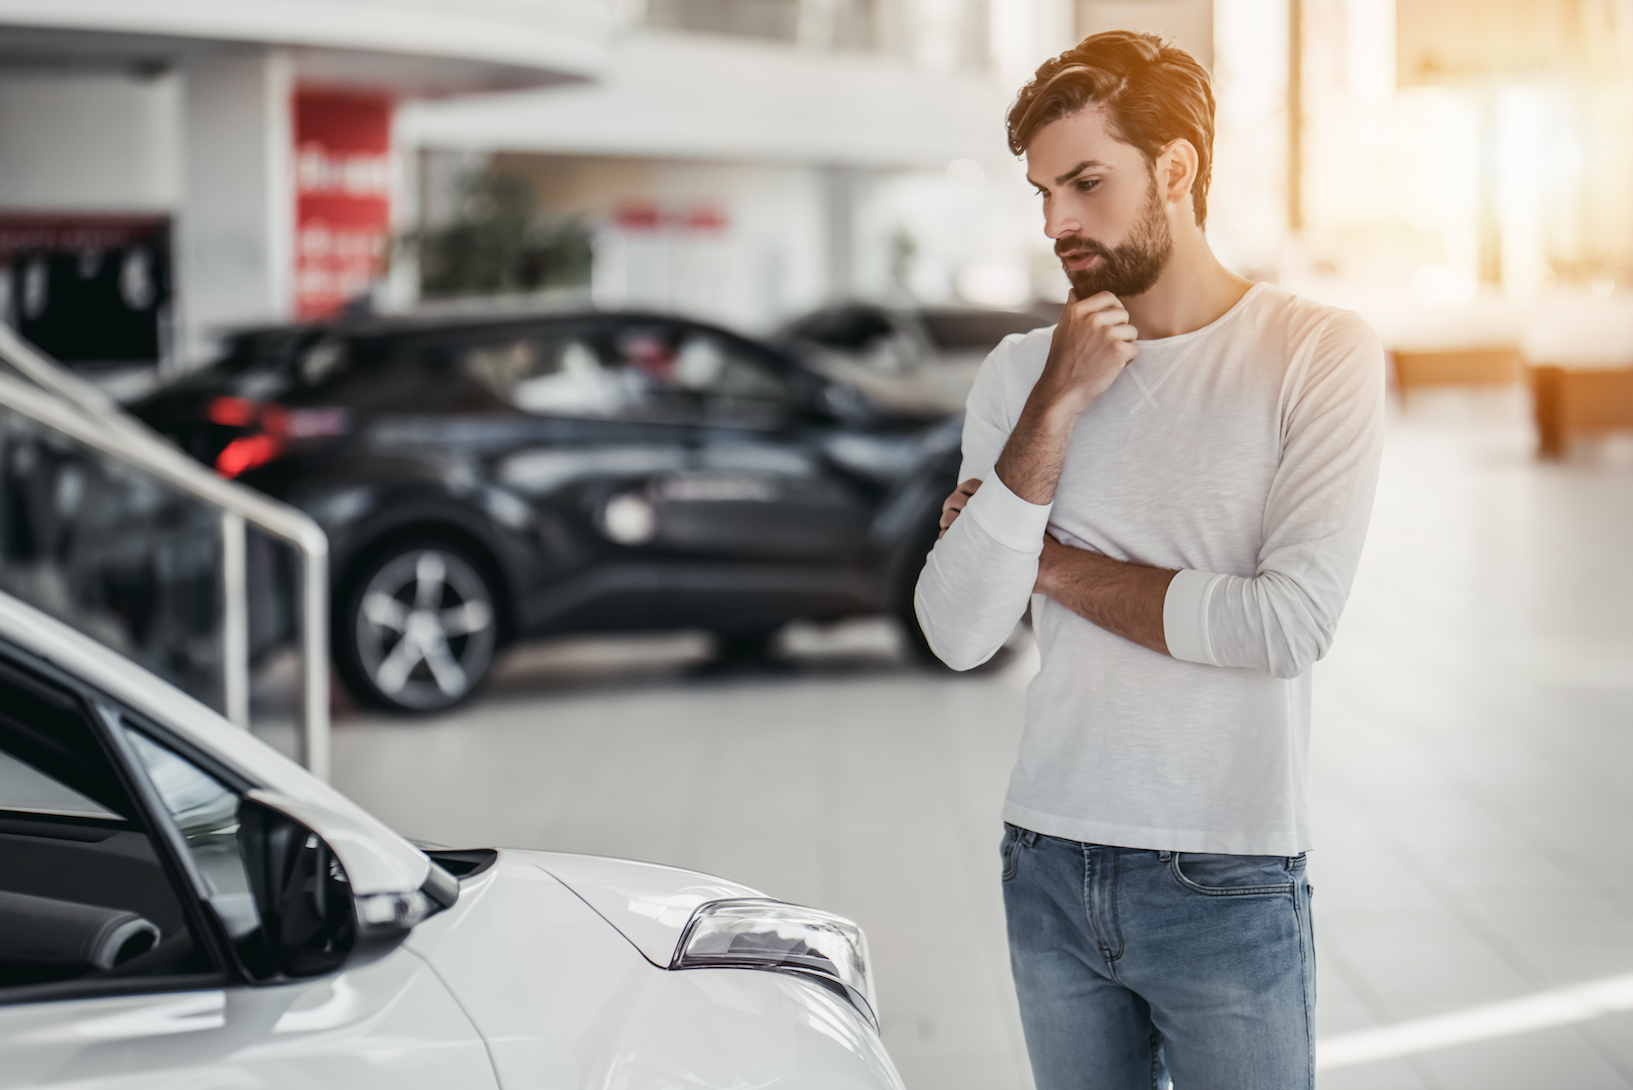 Important Factors to Consider When Purchasing a Car While in Debt